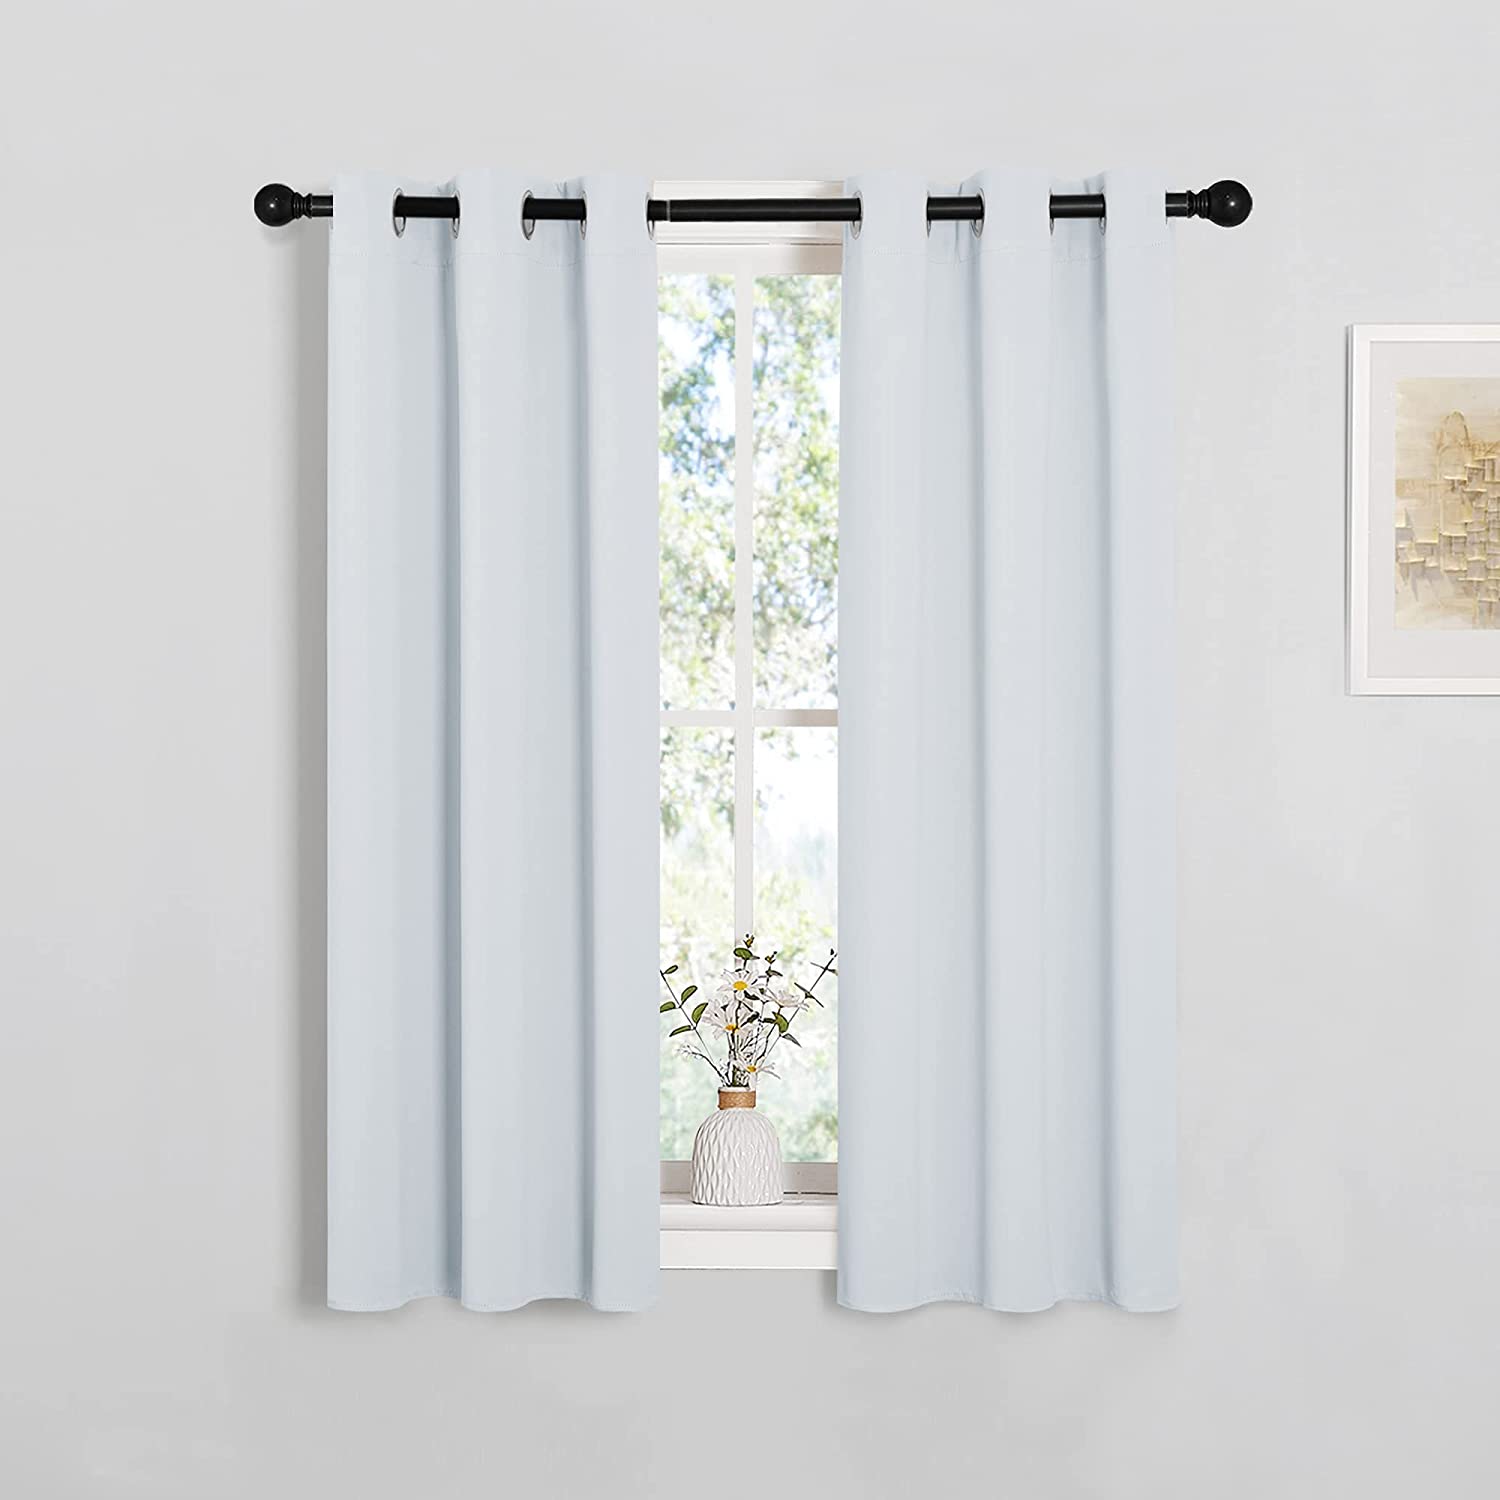 Silver Grommet Blackout Weave Curtains For Living Roomand Bedroom 2 Panels KGORGE Store